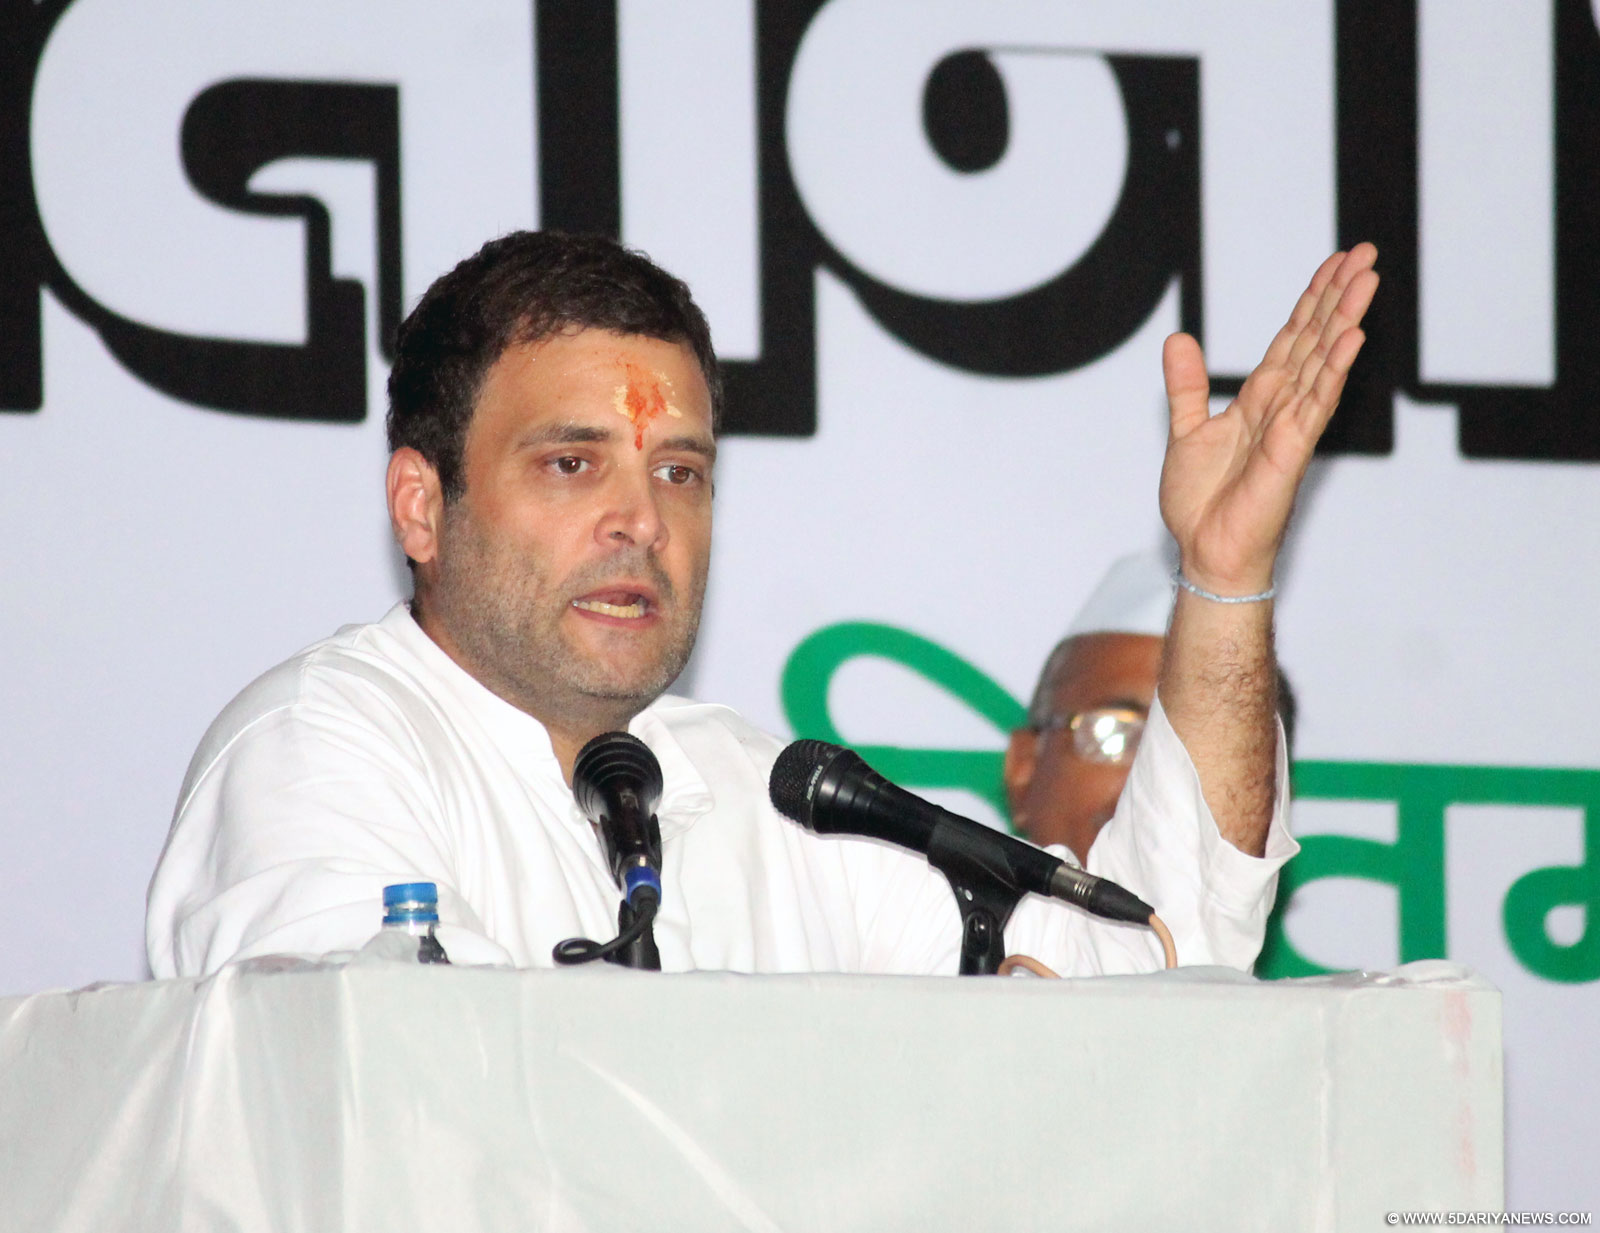  Congress vice president Rahul Gandhi addresses during a party rally in Mathura, on Sep 21, 2015.